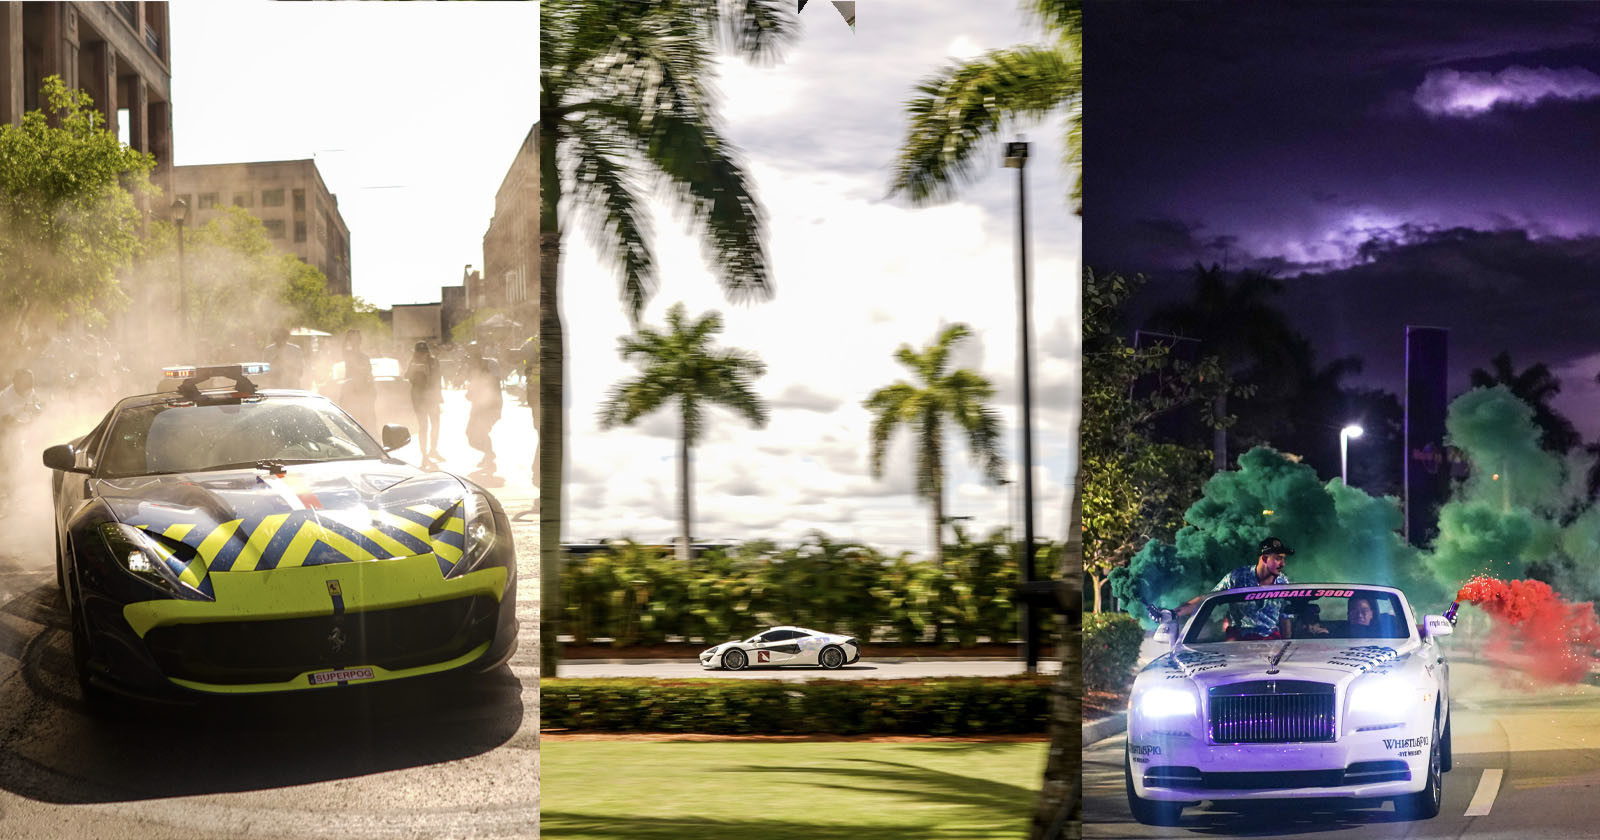 An Epic Transatlantic Journey to Photograph the Gumball 3000 Rally